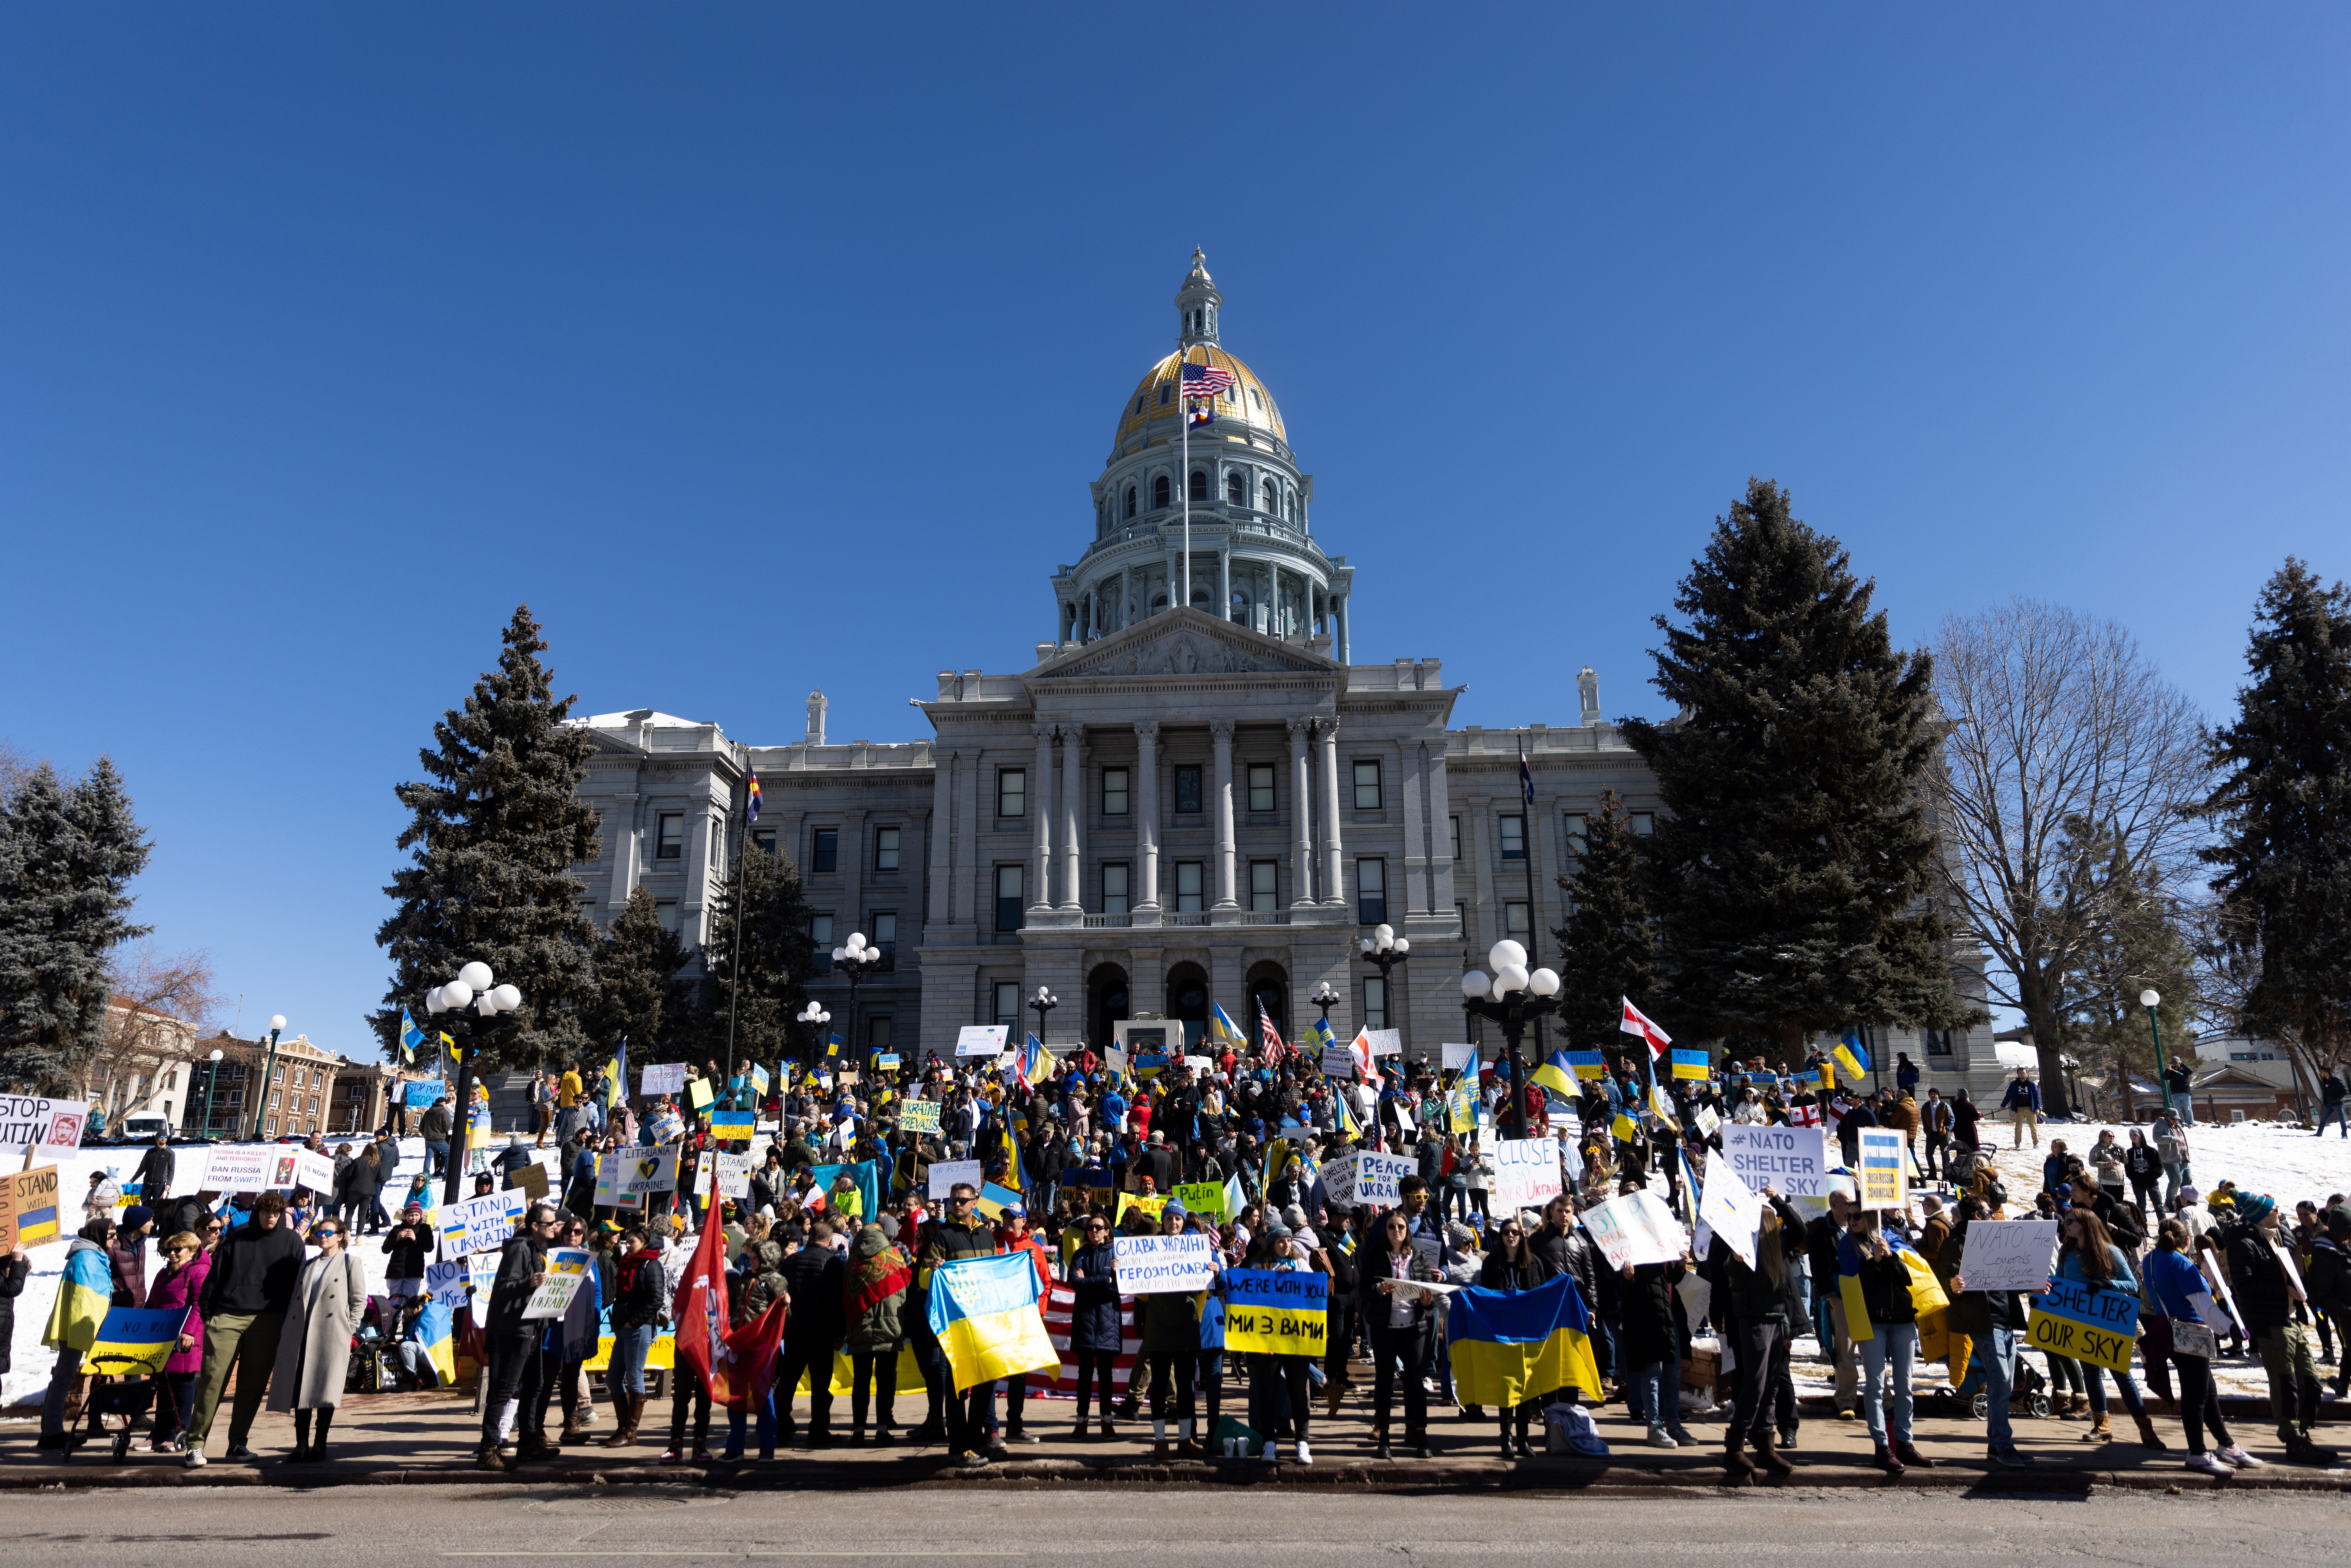 Pro-Ukrainian rallies and protests are happening all across the globe after Russian forces invaded Ukraine. In Denver, hundreds gathered outside the State Capitol to show their support for Ukraine on February 26, 2022. Photo by Alyson McClaran